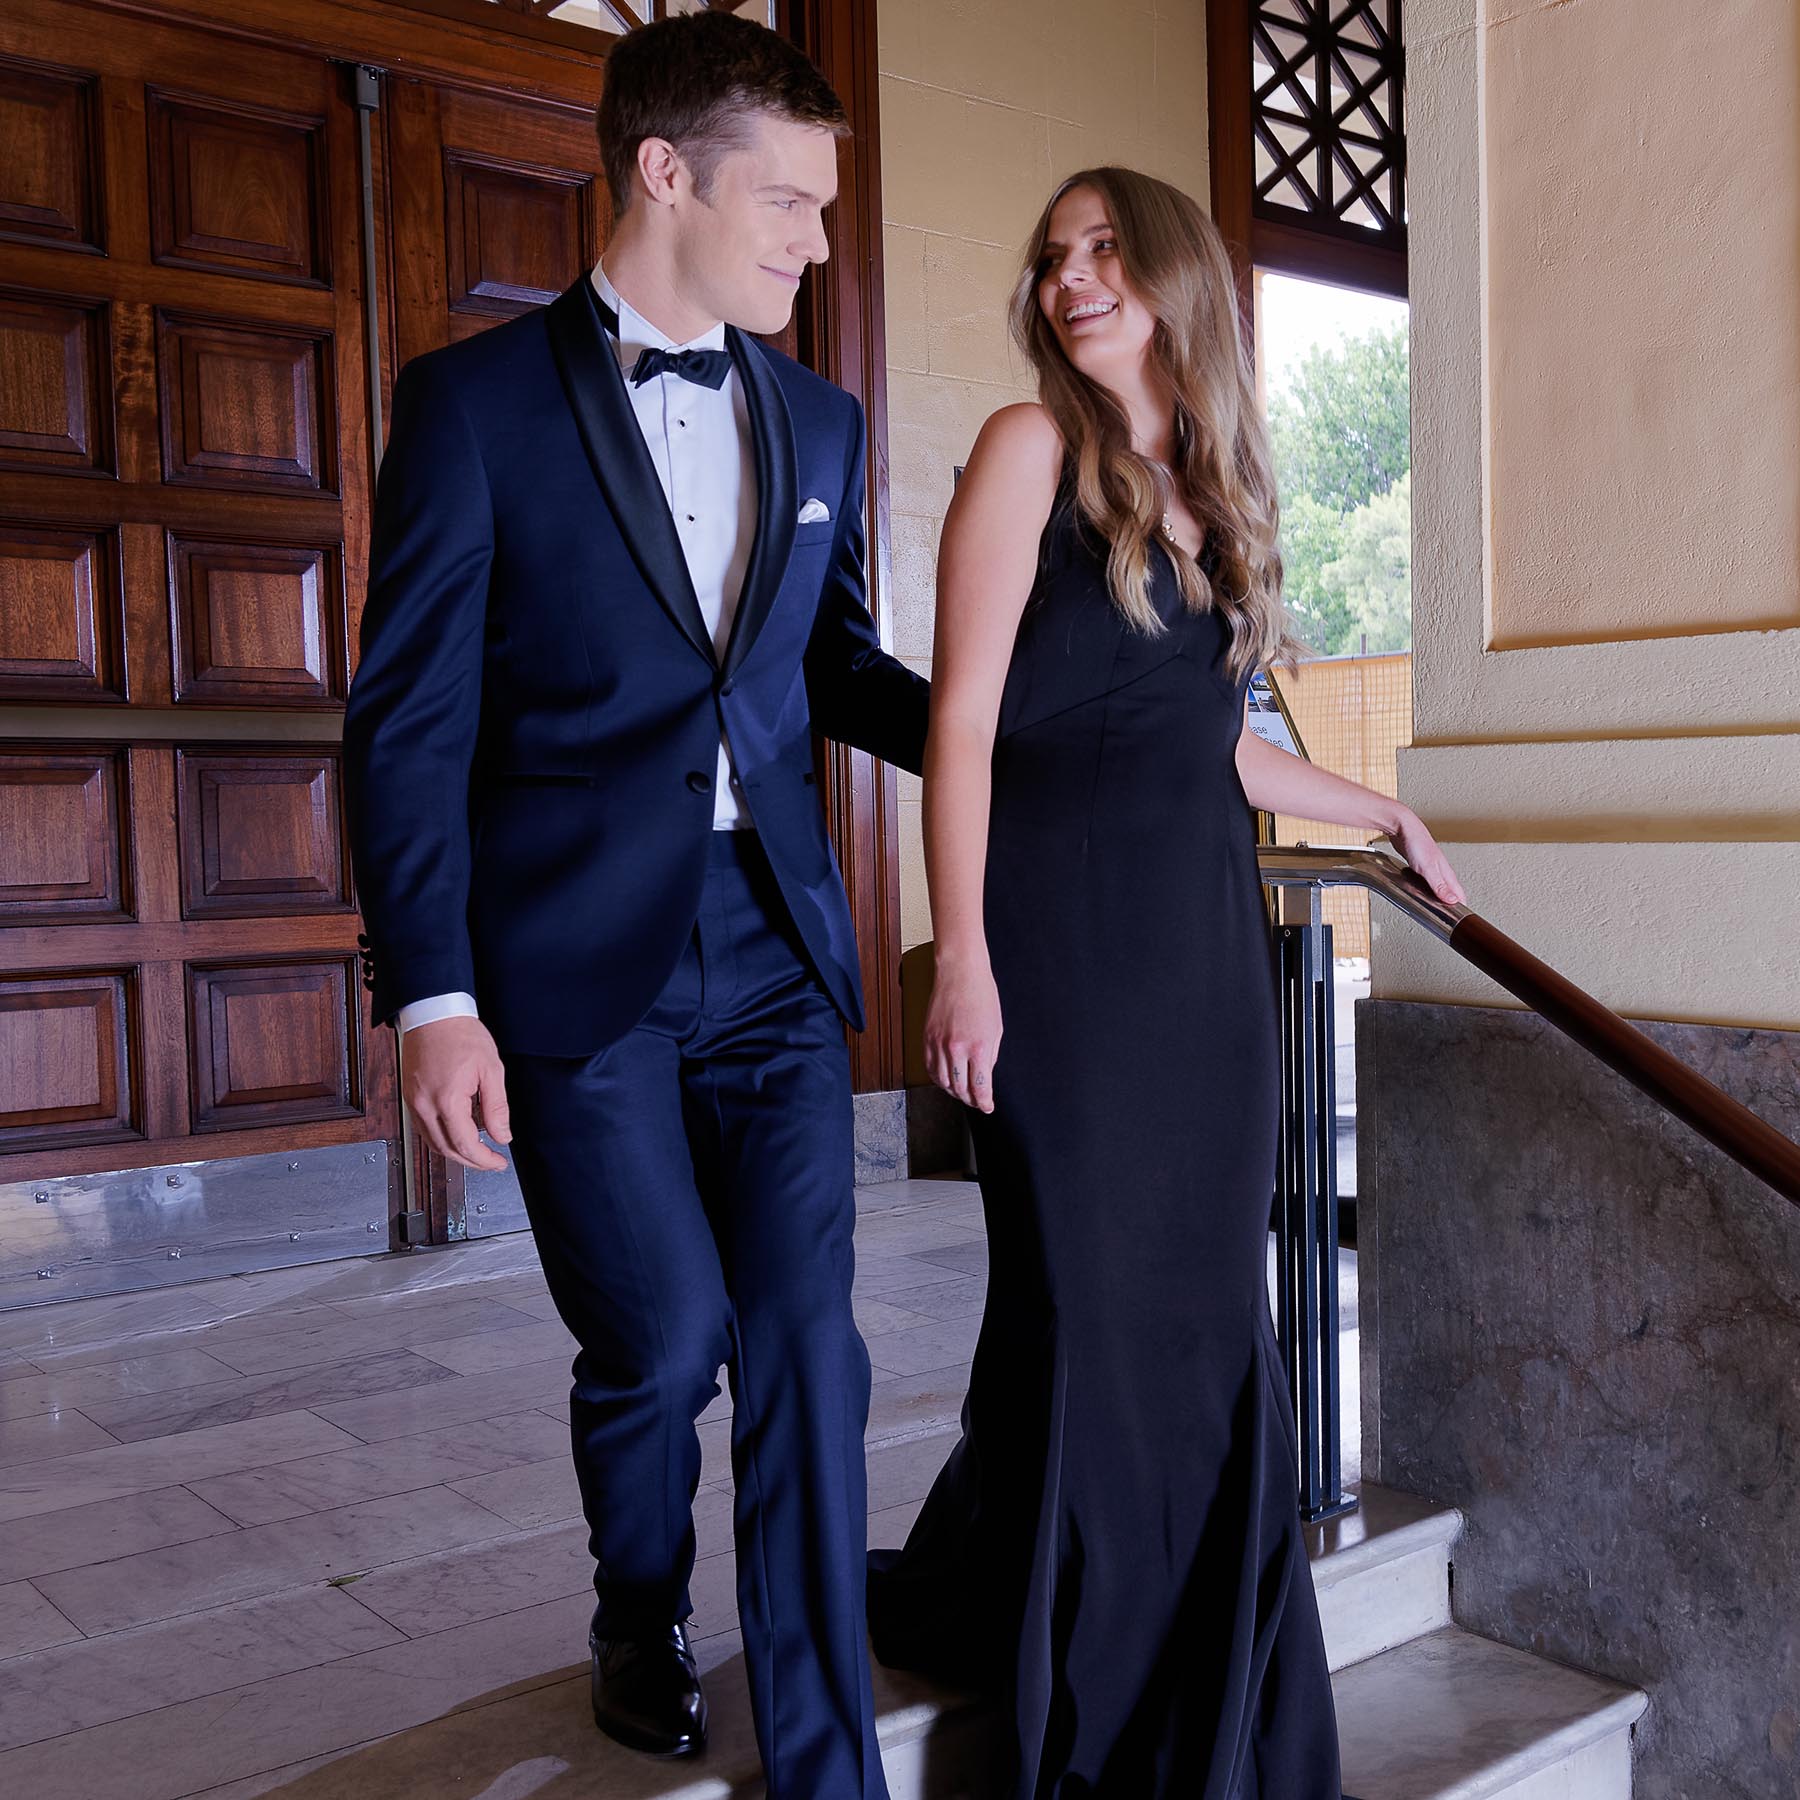 tux to go with navy dress